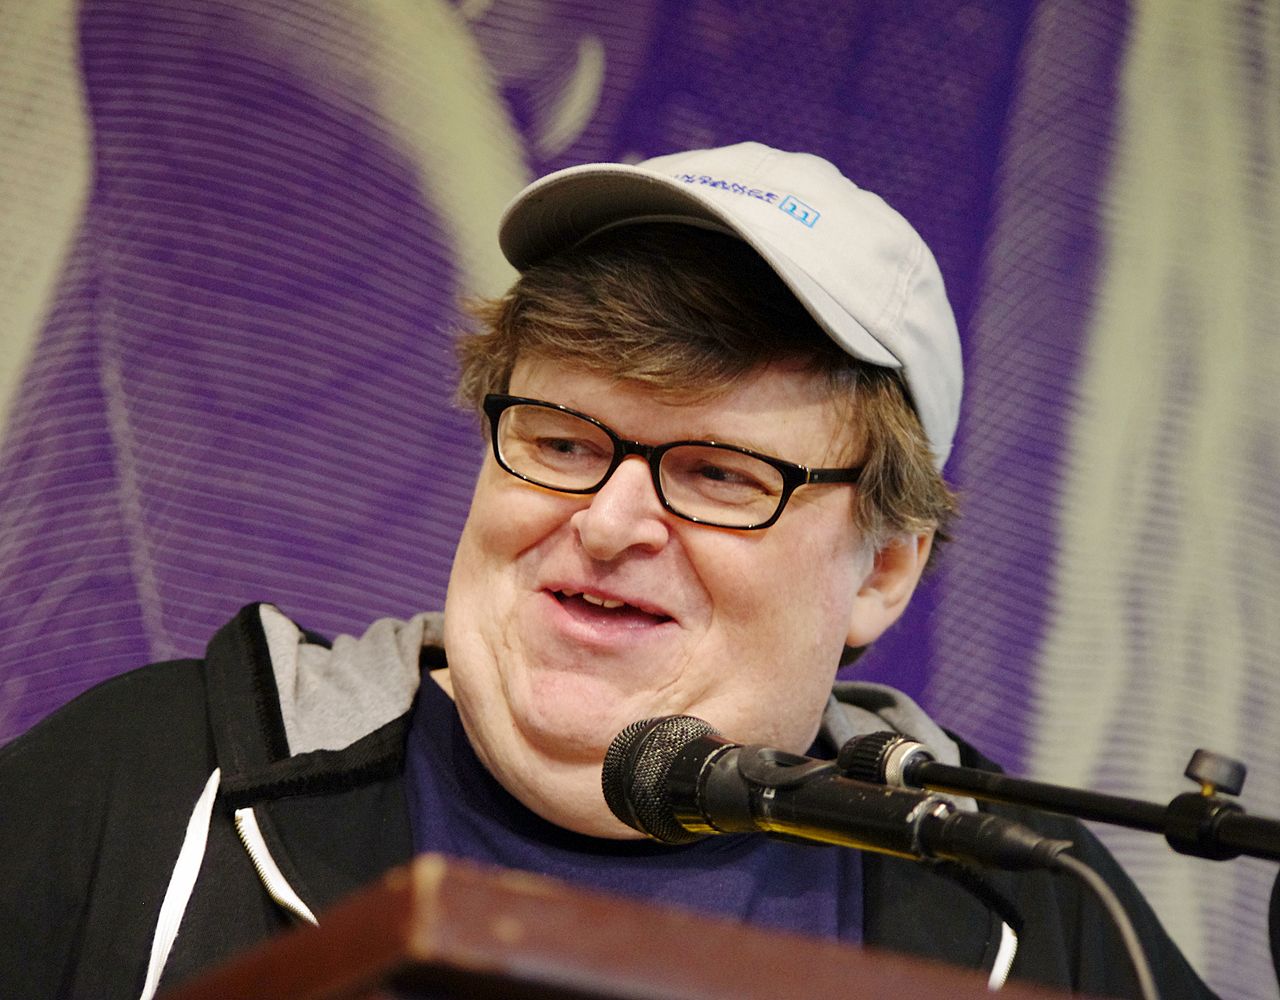 Image: CNN, MSNBC, and Hollywood Leftist kook Michael Moore all helped Russia sow discord by promoting a FAKE anti-Trump rally